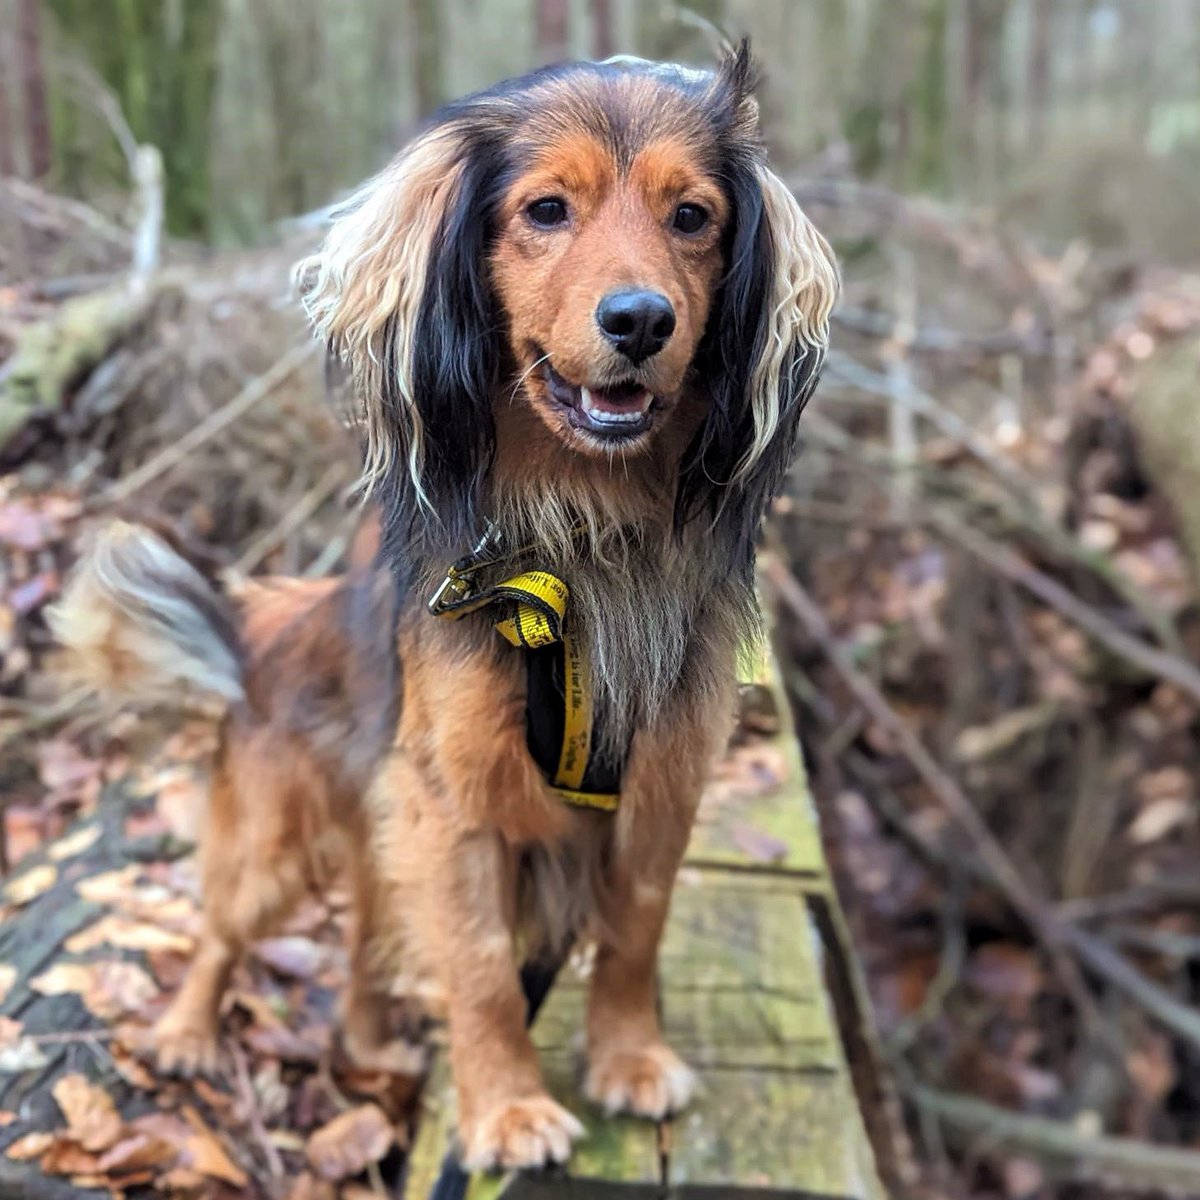 Gusty is sending all the pawsitive vibes this morning as weekend adventures like this aren’t far away!
🌲🐕💛

A reminder that we are open to the public today, Saturday and Sunday from 12pm until 4pm! Gusty and his friends are looking forward to seeing you 👋

@dogstrust #ADIFL